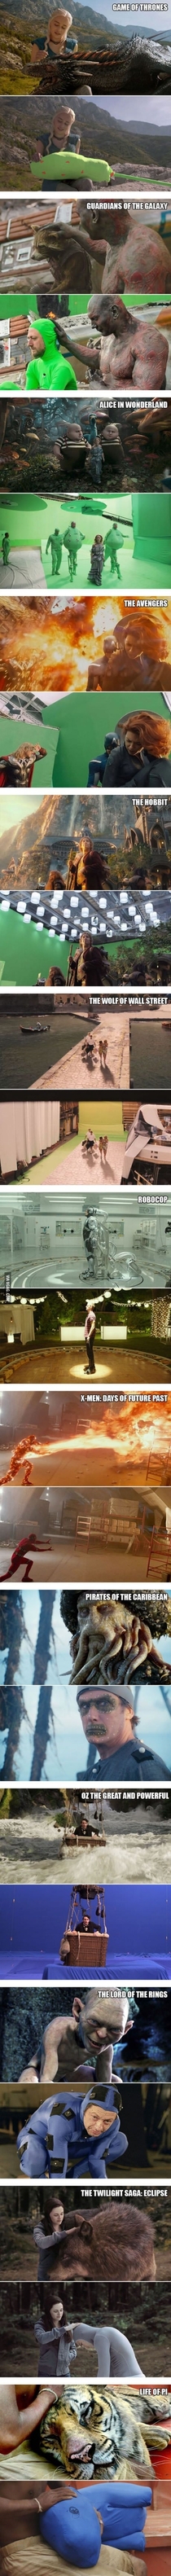 Movie Scenes Before And After Special Effects